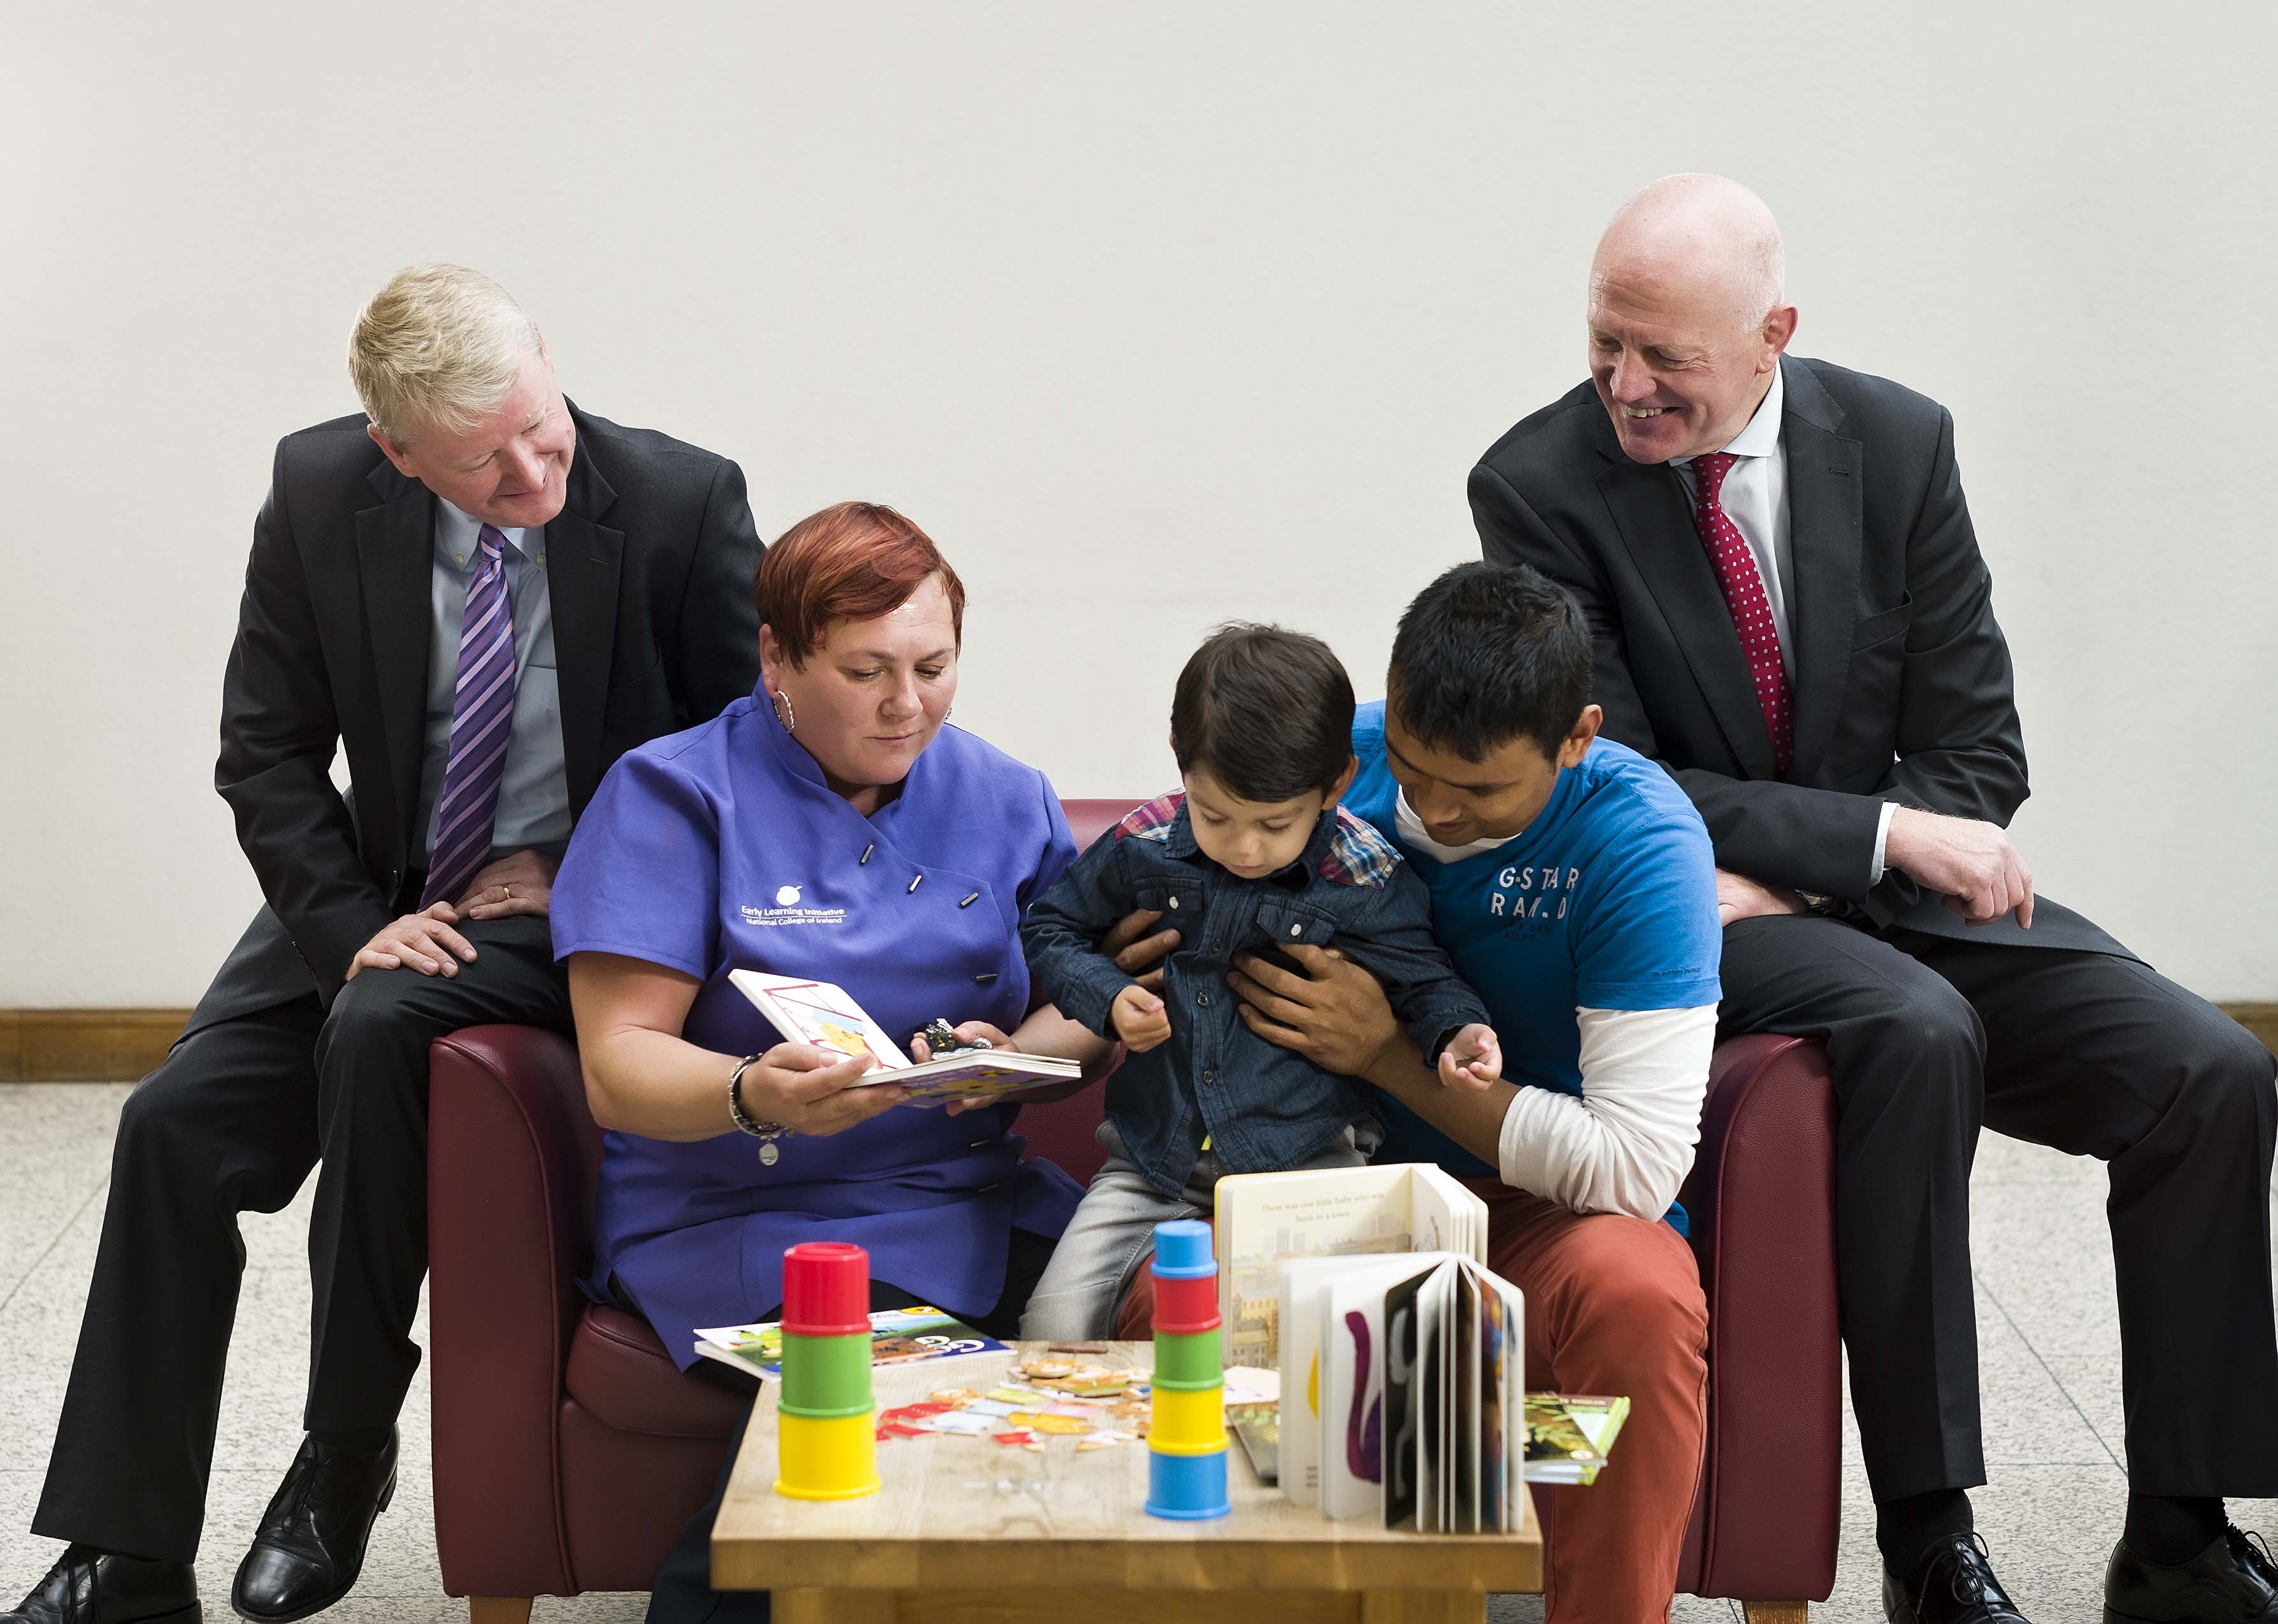 NCI's Early Years Educational Programme Set to Expand in Dublin's Docklands